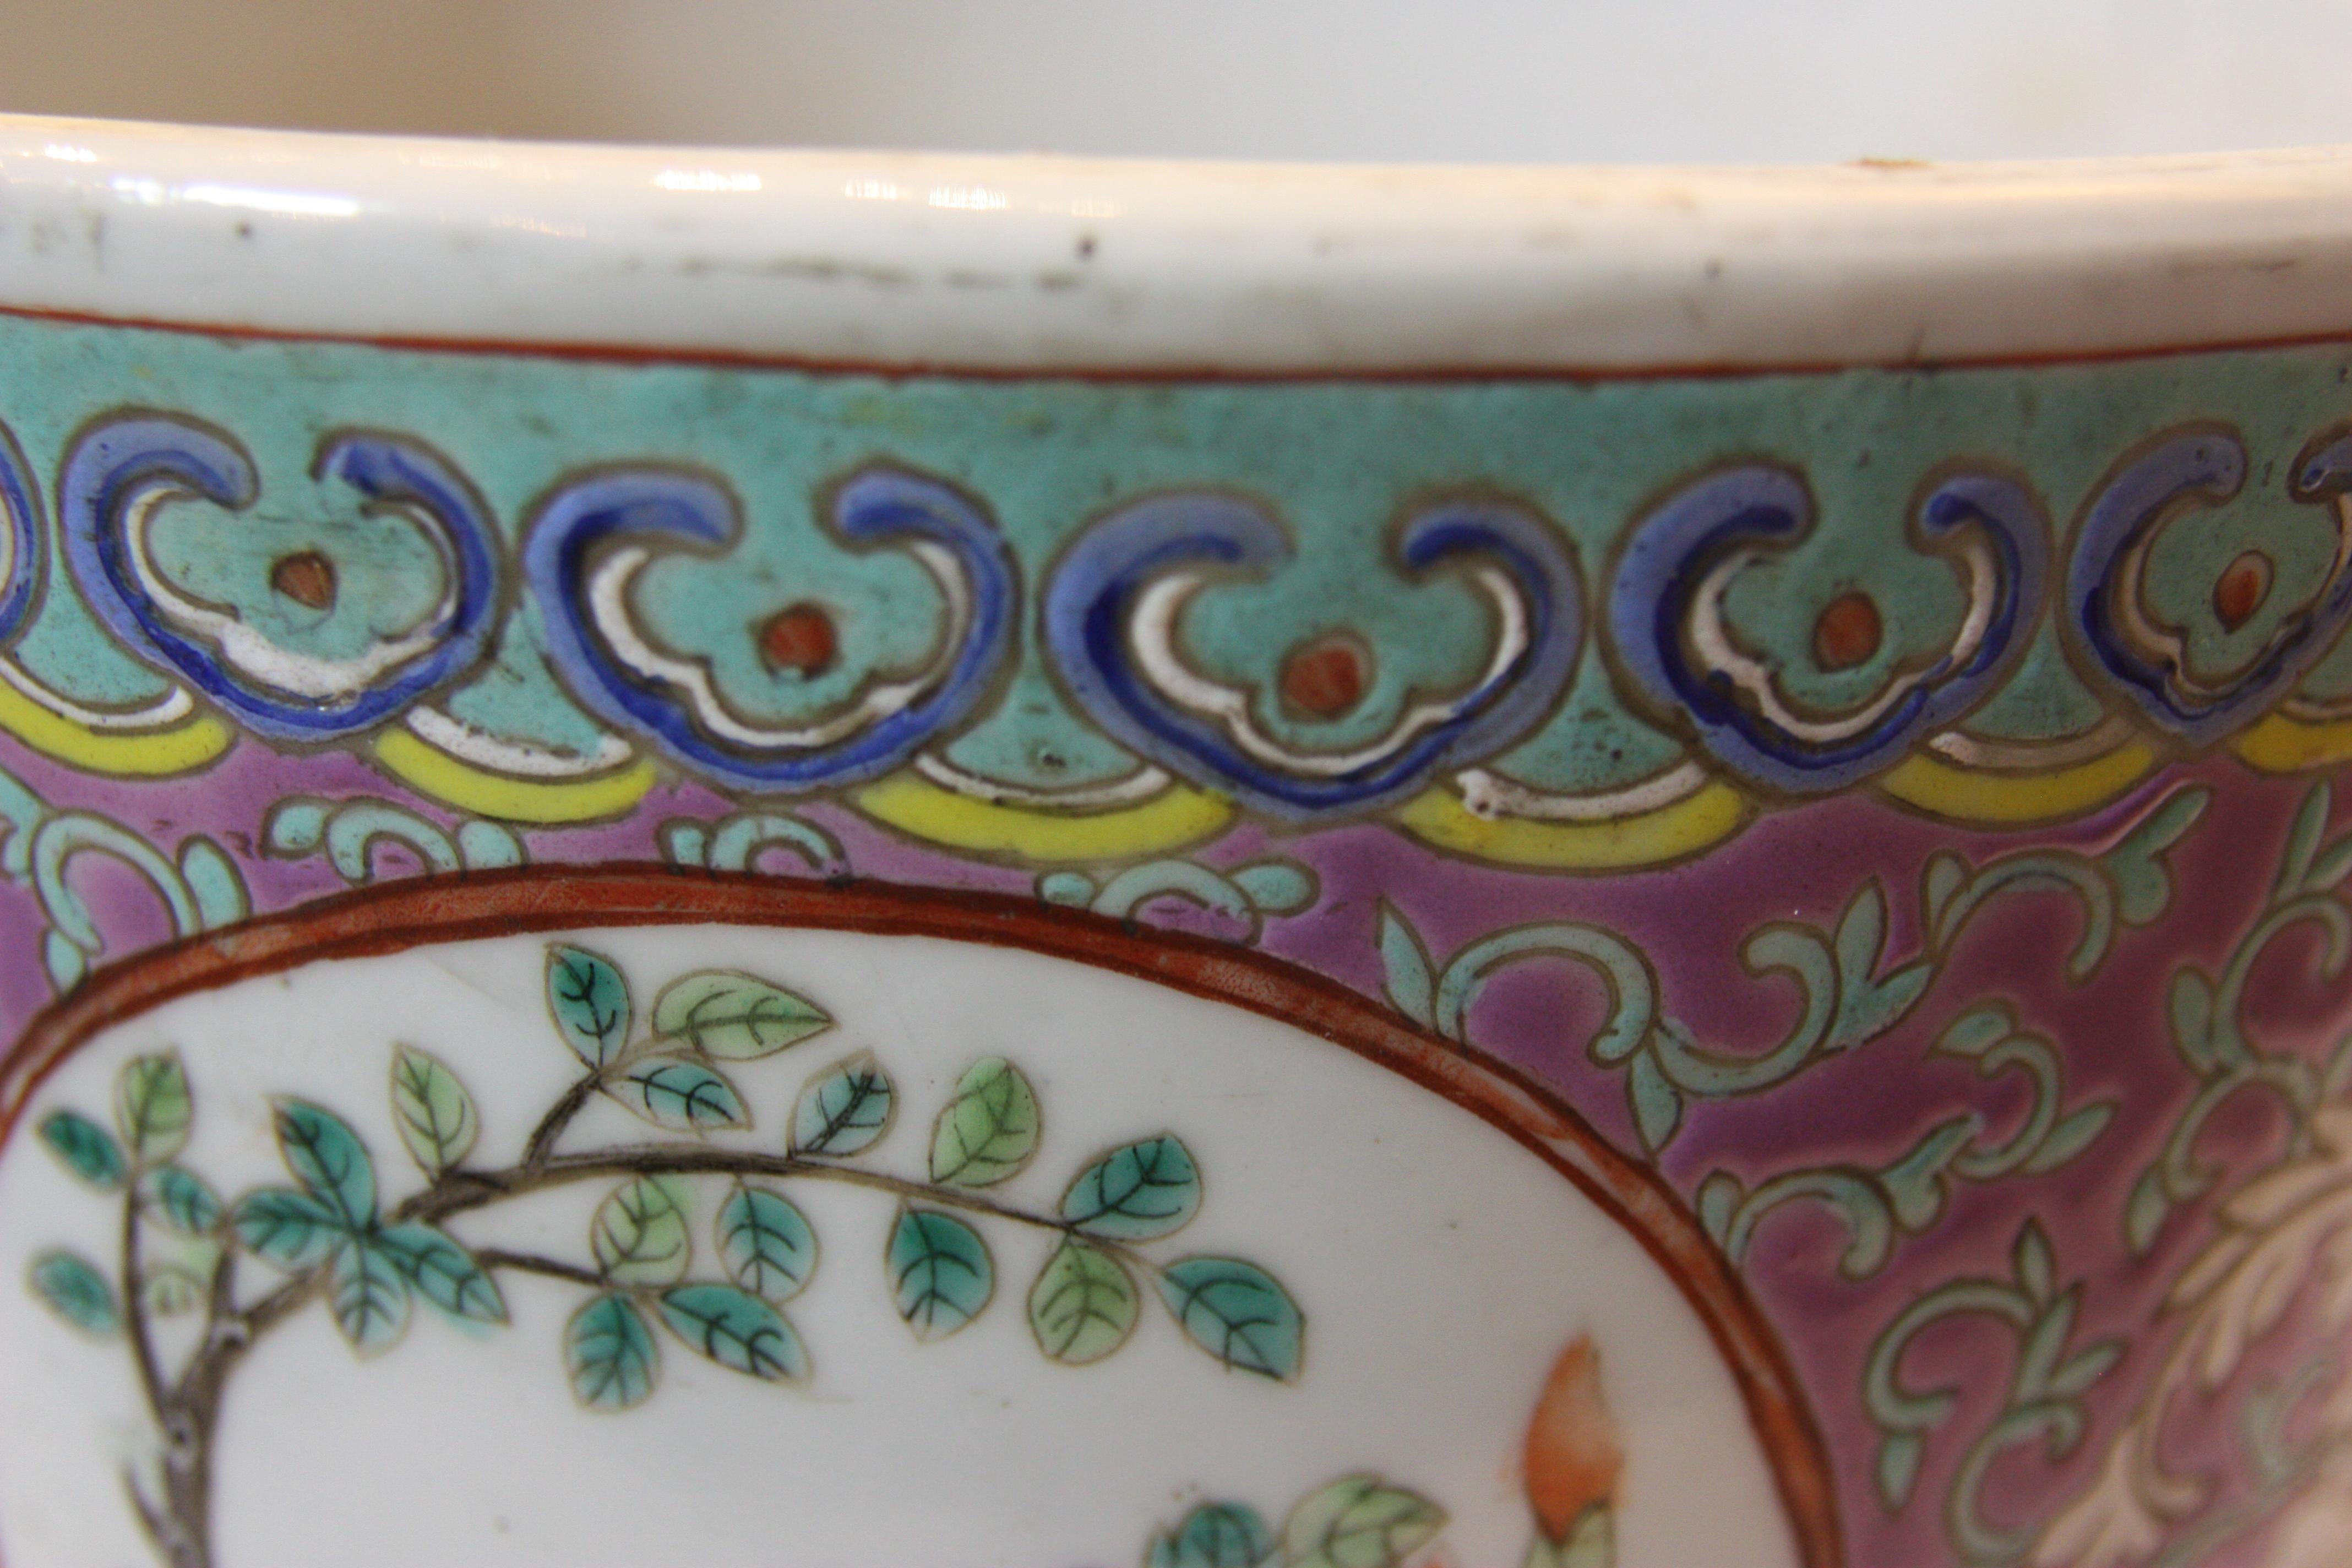 Pair of Hand-Painted Cachepot Jardinieres with Intricate Design In Good Condition For Sale In San Antonio, TX